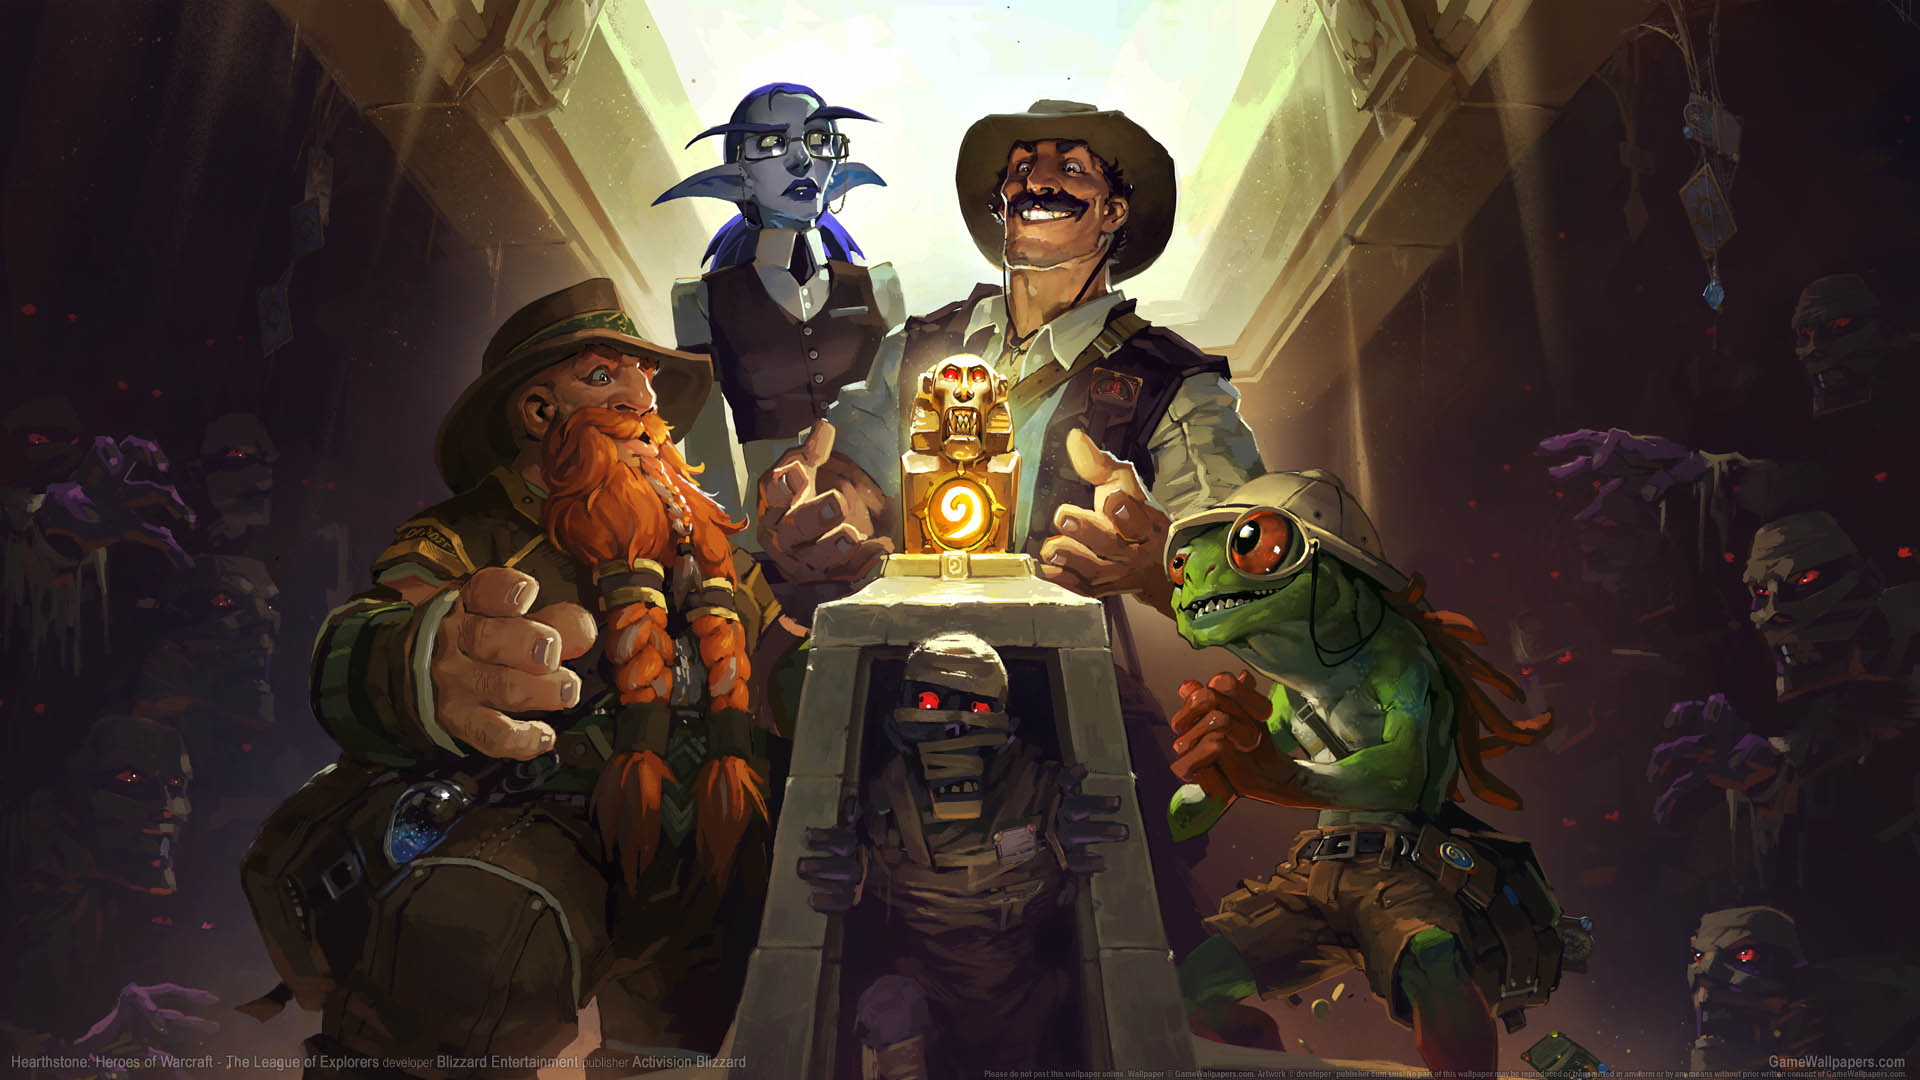 Hearthstone: Heroes of Warcraft - The League of Explorers wallpaper 01 1920x1080